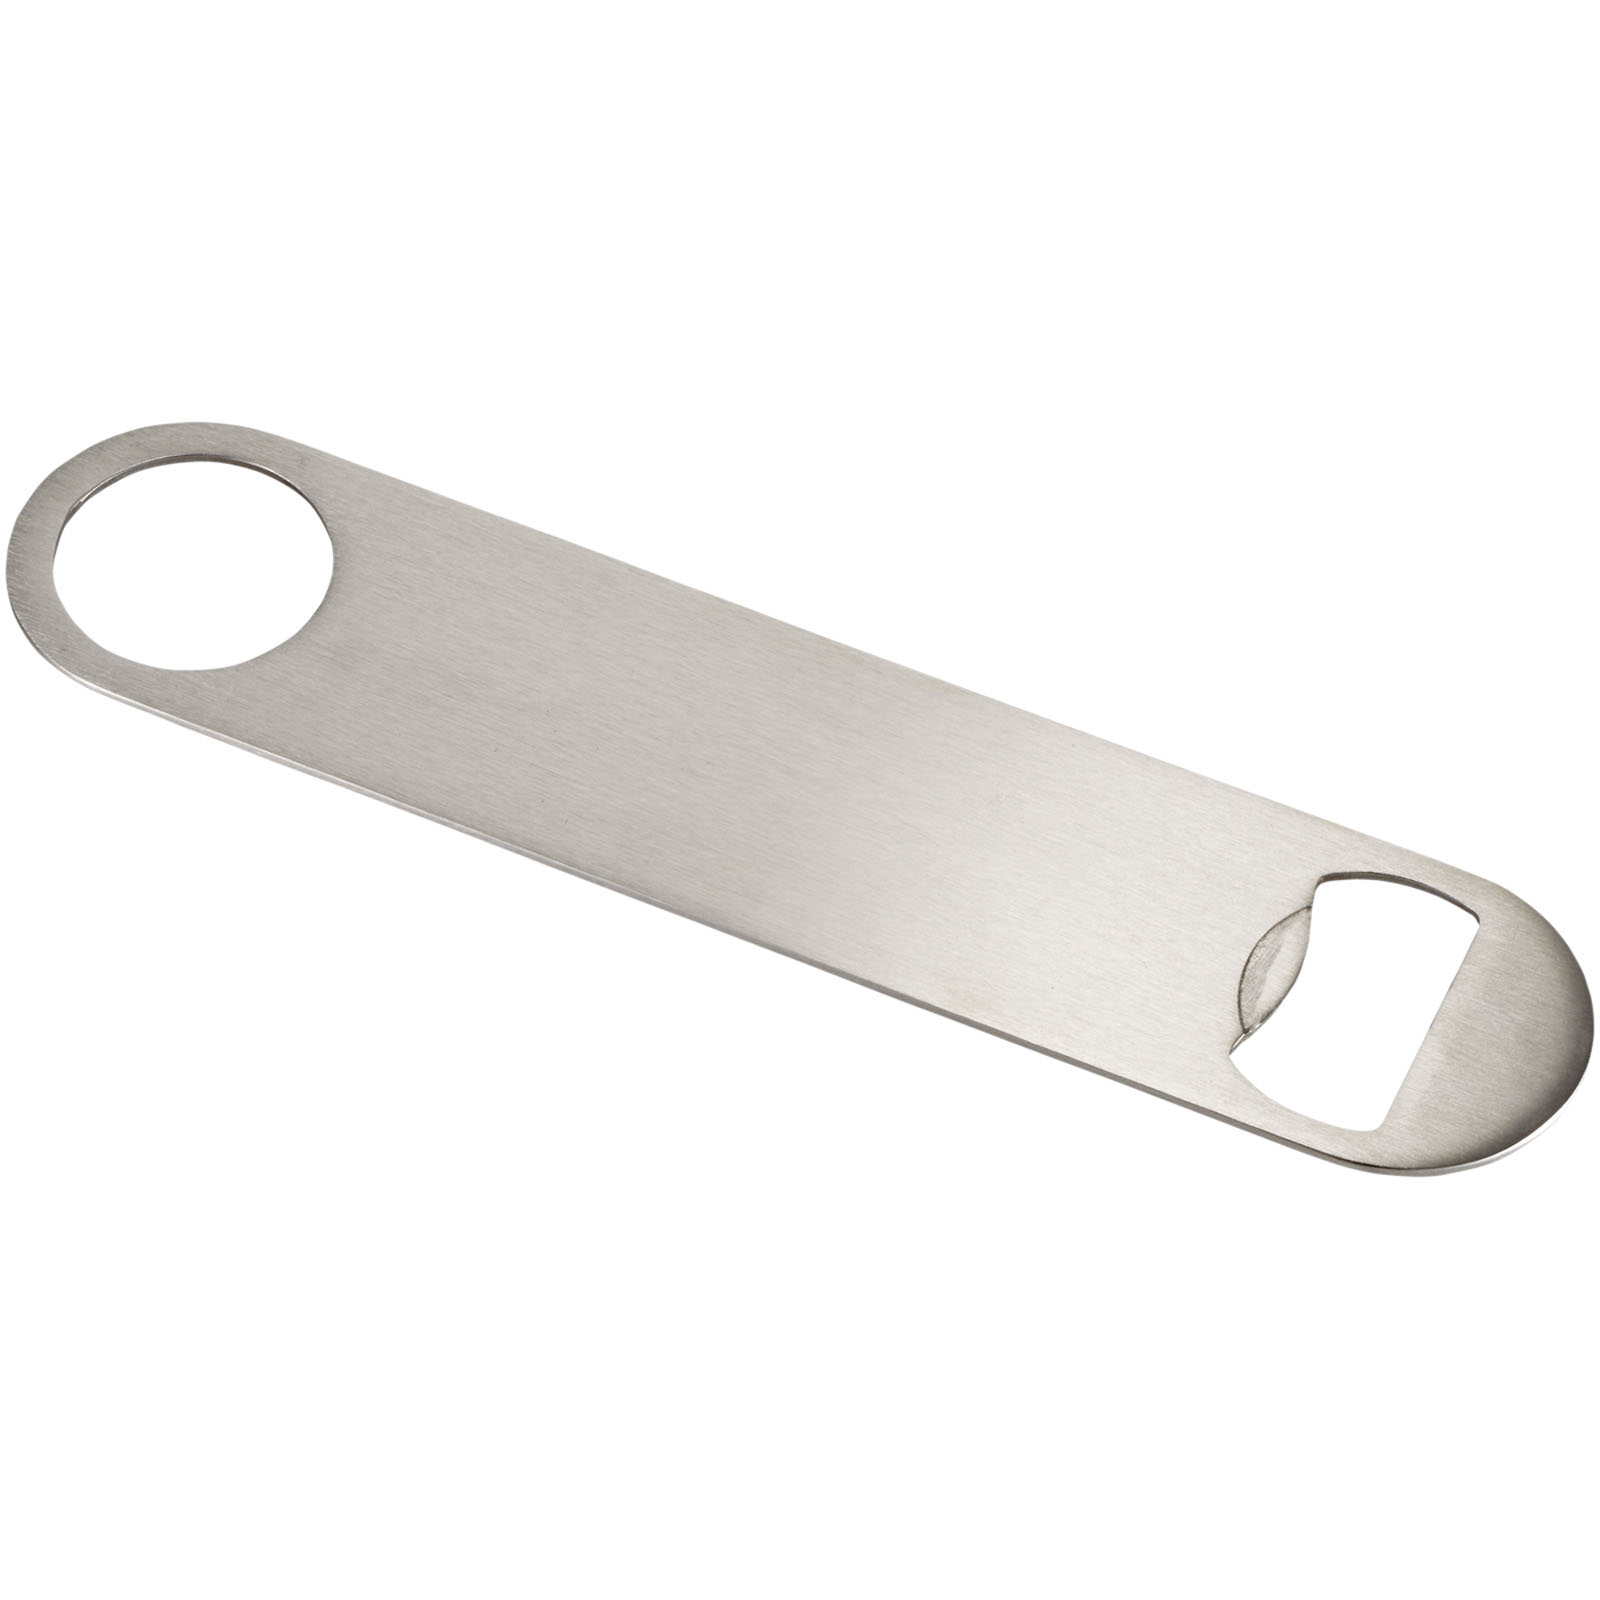 Advertising Bottle Openers & Accessories - Paddle bottle opener